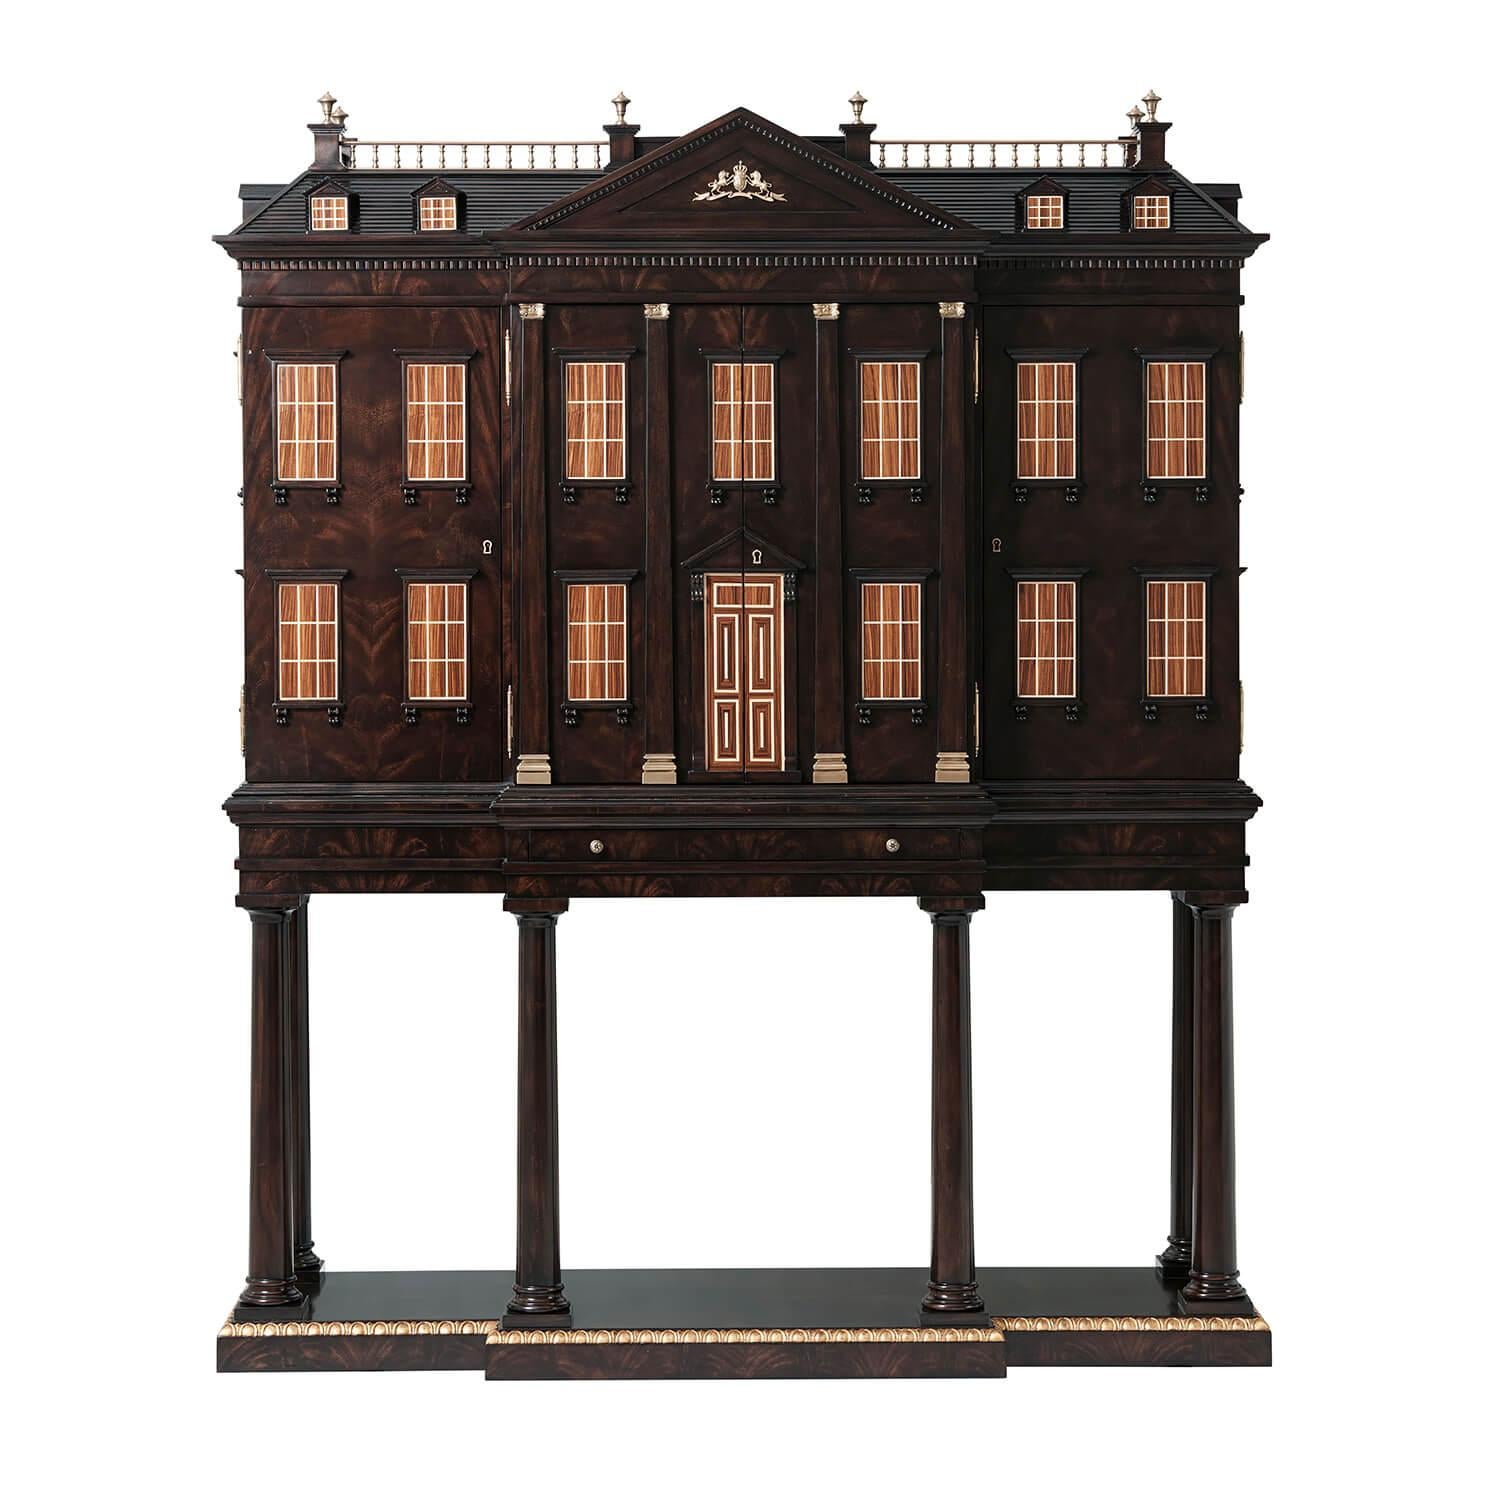 A very finely carved flame mahogany veneered architectural bar cabinet of the Althorp House façade, the upper section with a gabled brass galleried roof with 8 dormers, with a Spencer coat of arms pediment, the Cabinet with 21 Morado and Sycamore